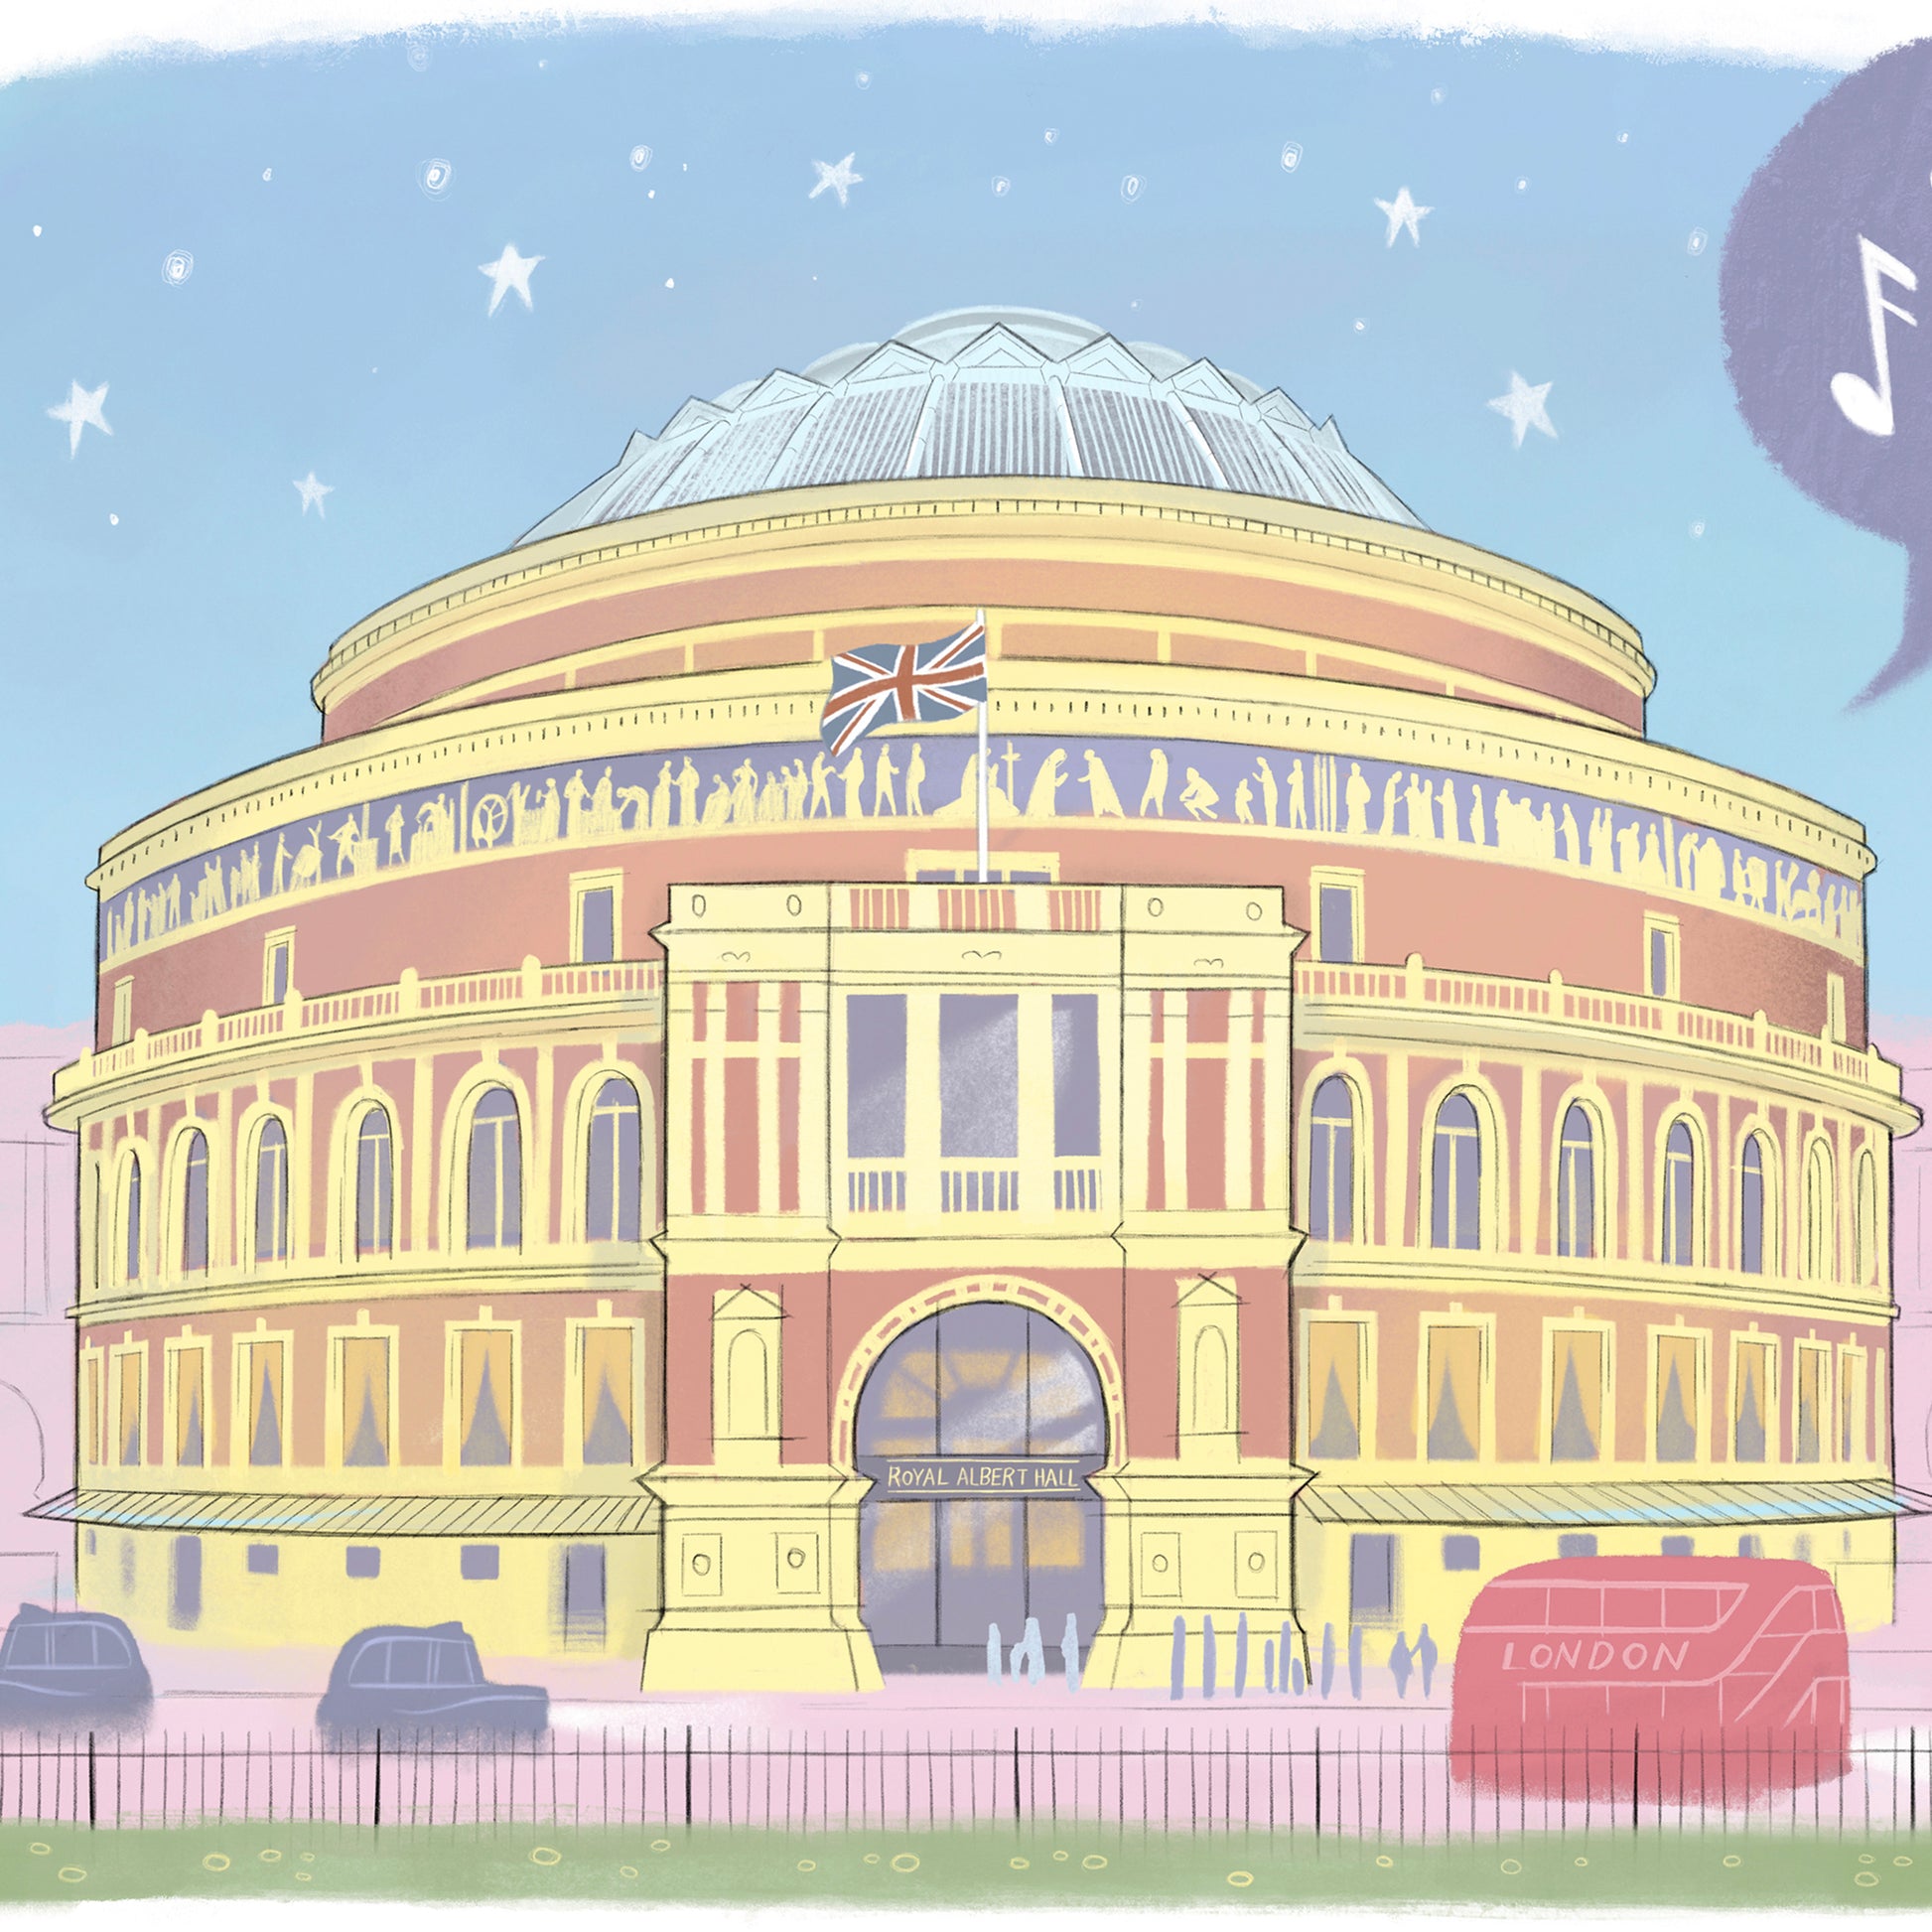 A close up London's Royal Albert Hall illustration by mike green illustration.